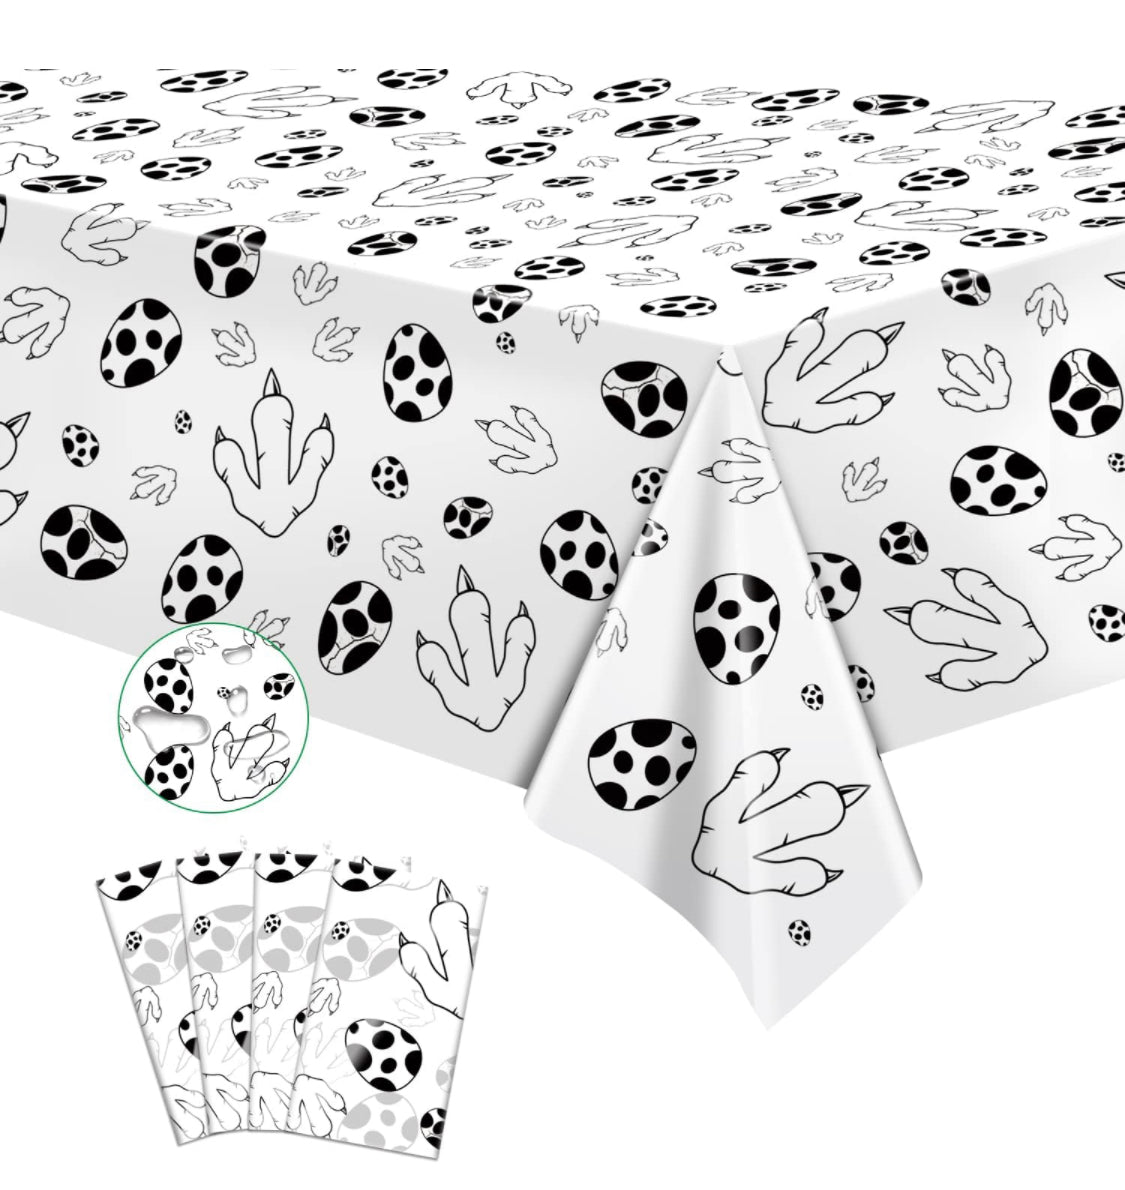 Dinosaur Paw Print Tablecloth Party Decoration, Dino Paw Print Disposable Rectangle Plastic Table Cover 108 x 54inch